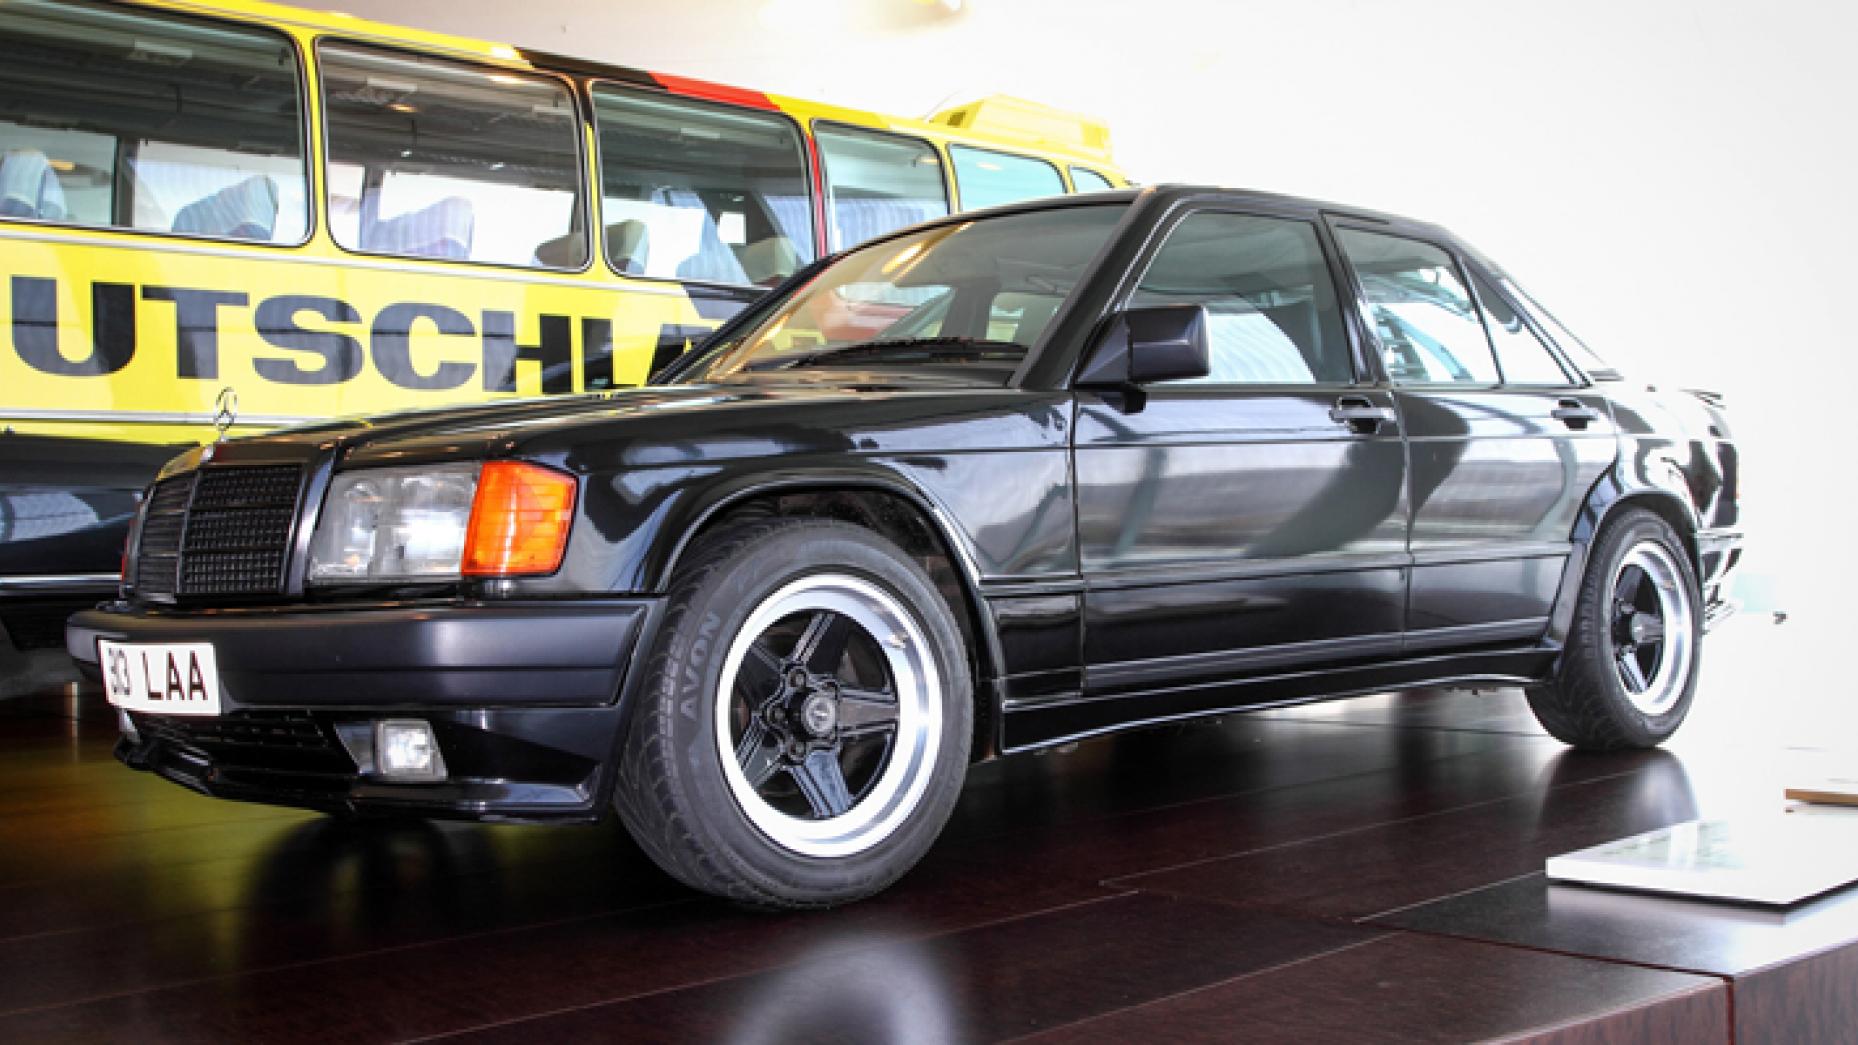 1984 MERCEDES-BENZ 190 E 2.3 AMG: Fact fans, did you know that this little black Mercedes used to belong to Beatles drummer Ringo Starr? When he bought the 190, it was but a lowly 2.0-litre. He had it fully converted into a 2.3-litre AMG cooking model in England, and as such, made it instantly fantastic.